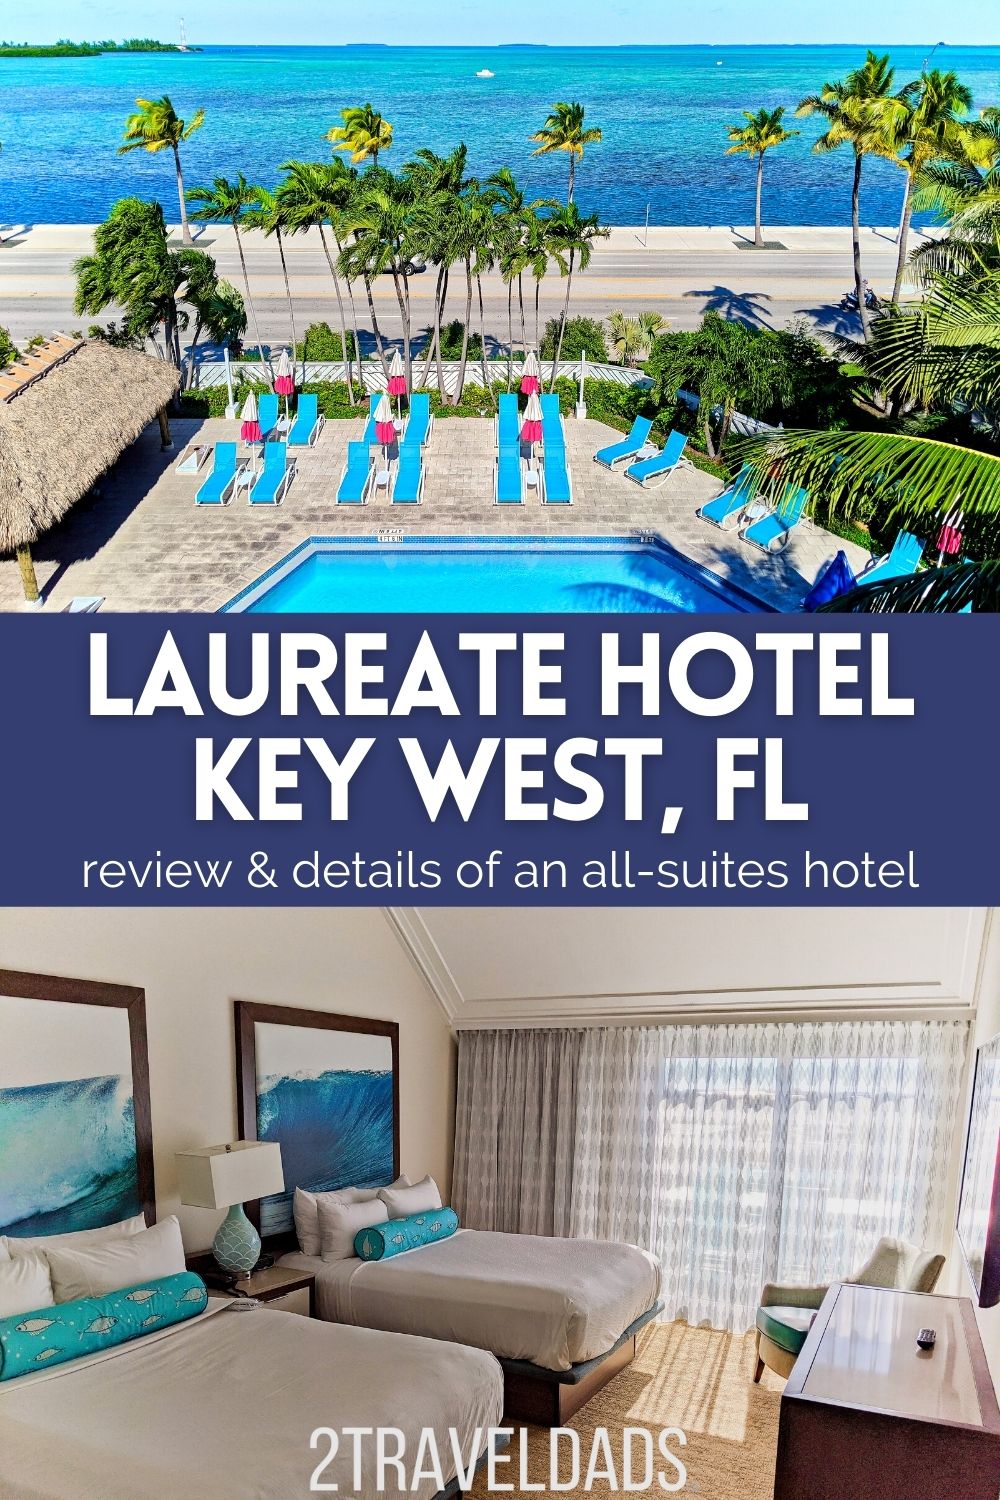 Review of the Laureate Key West, an all-suites hotel. In a great location that's NOT downtown, the Laureate is perfect for families with plenty of space and hotel amenities, directly across from the turquoise waters of the Florida Keys.